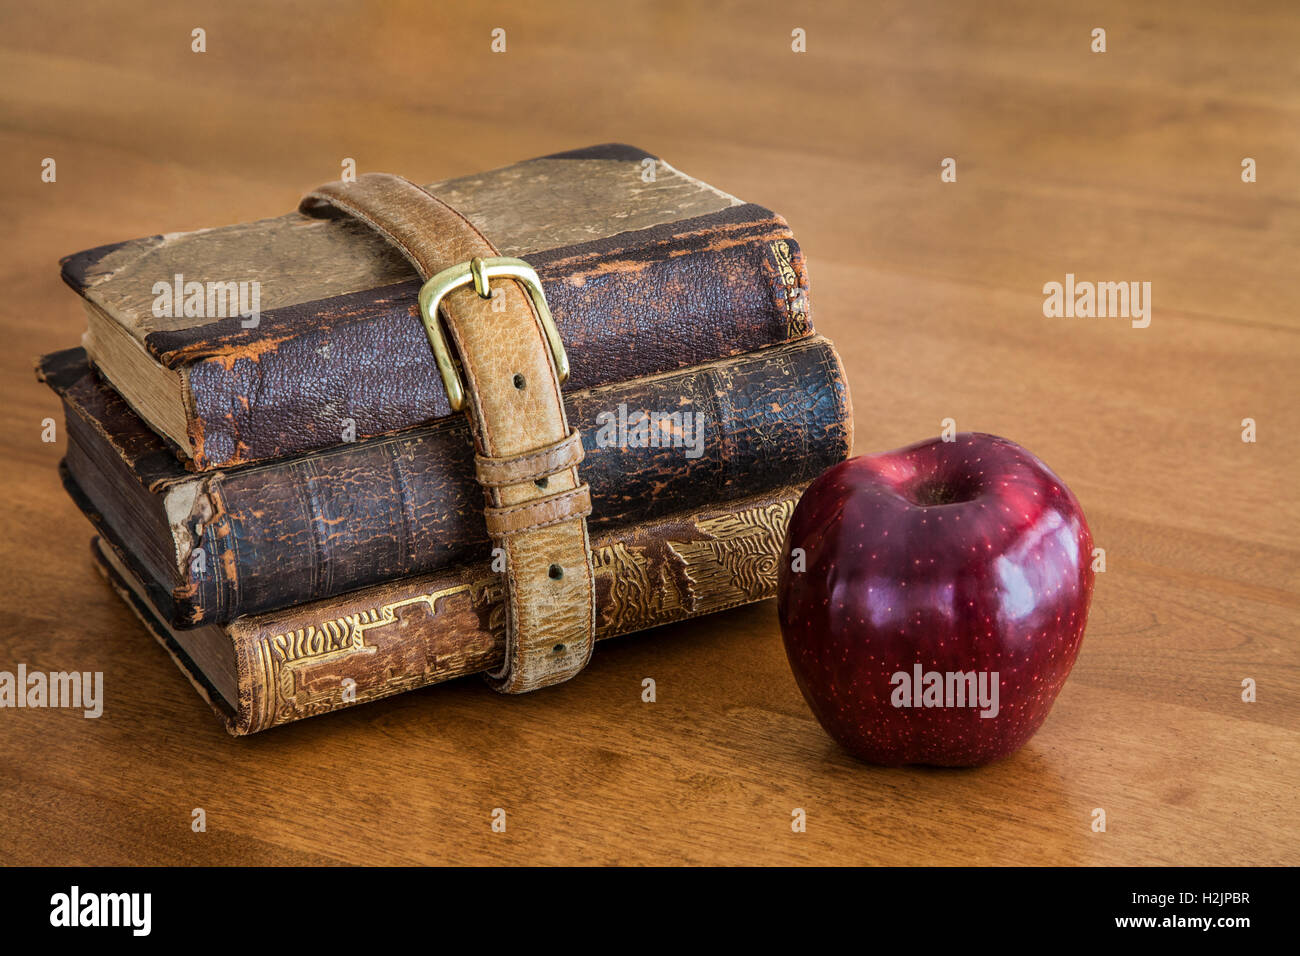 Three old school books wrapped with an old belt with one red apple for the teacher abstract on wood, USA, vintage objects still life, antique images Stock Photo